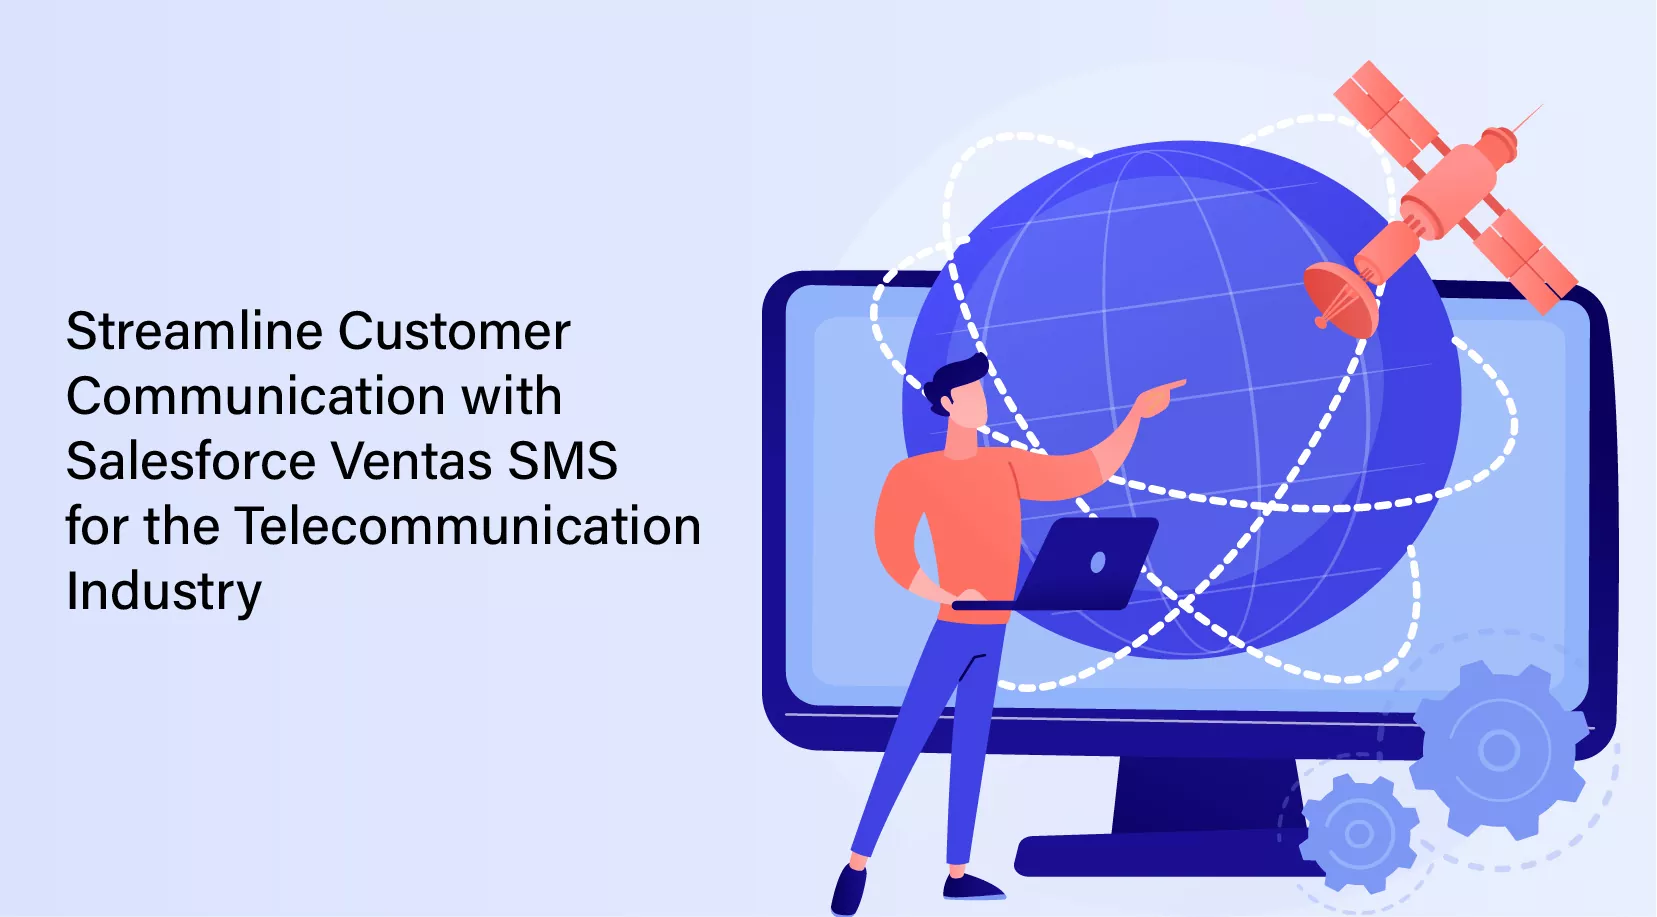 Streamline Customer Communication with Salesforce Ventas SMS for the Telecommunication Industry